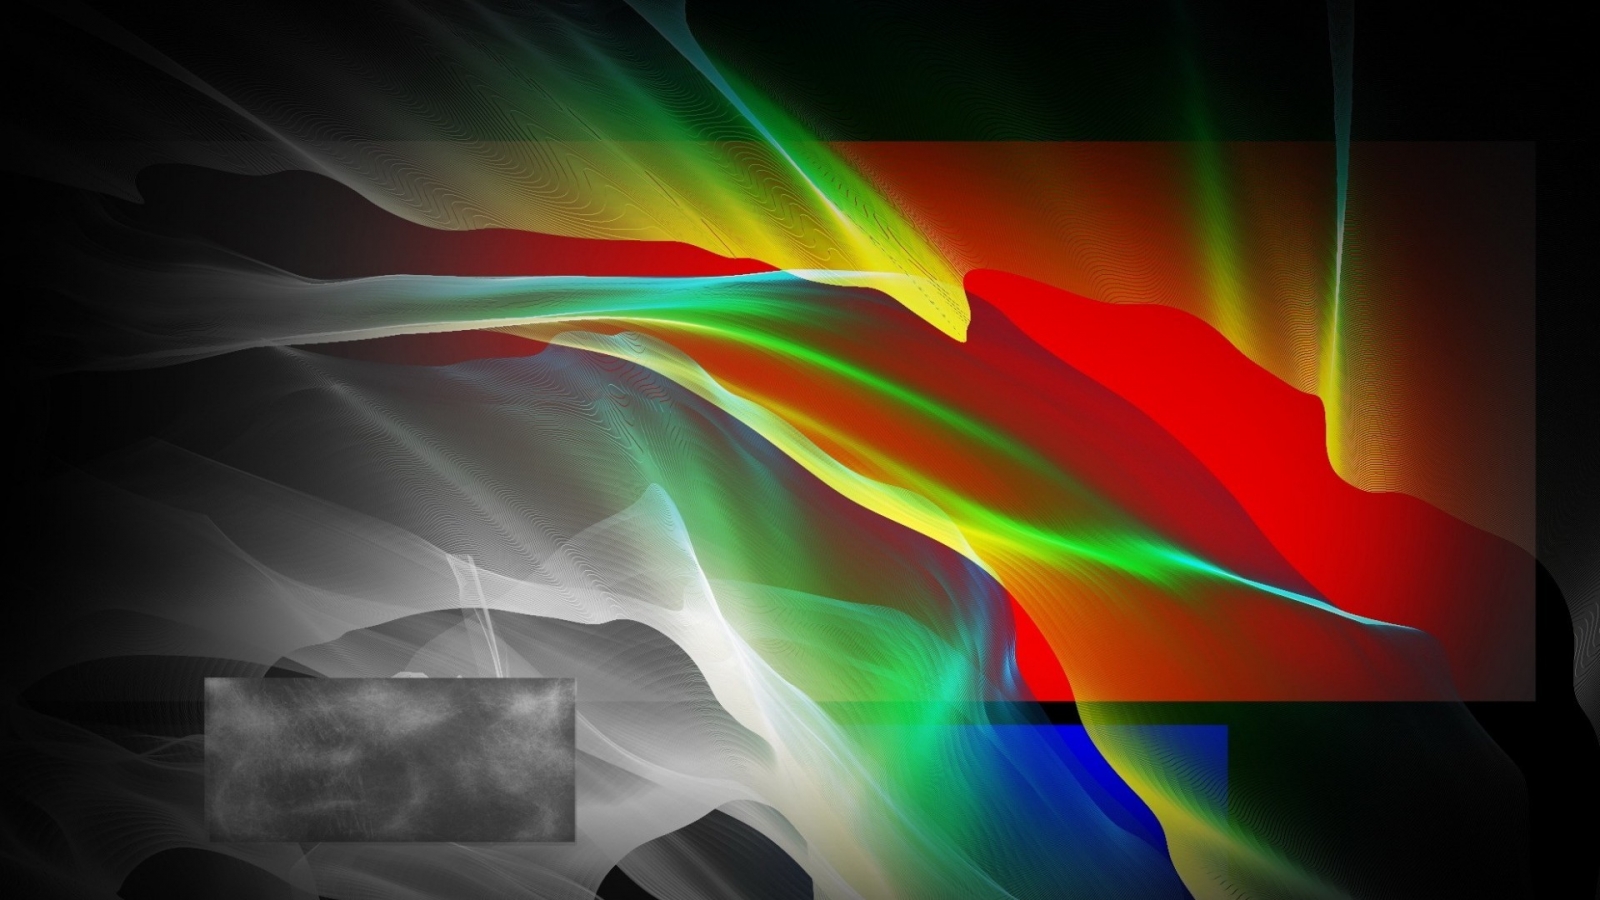 Abstract Shapes for 1600 x 900 HDTV resolution